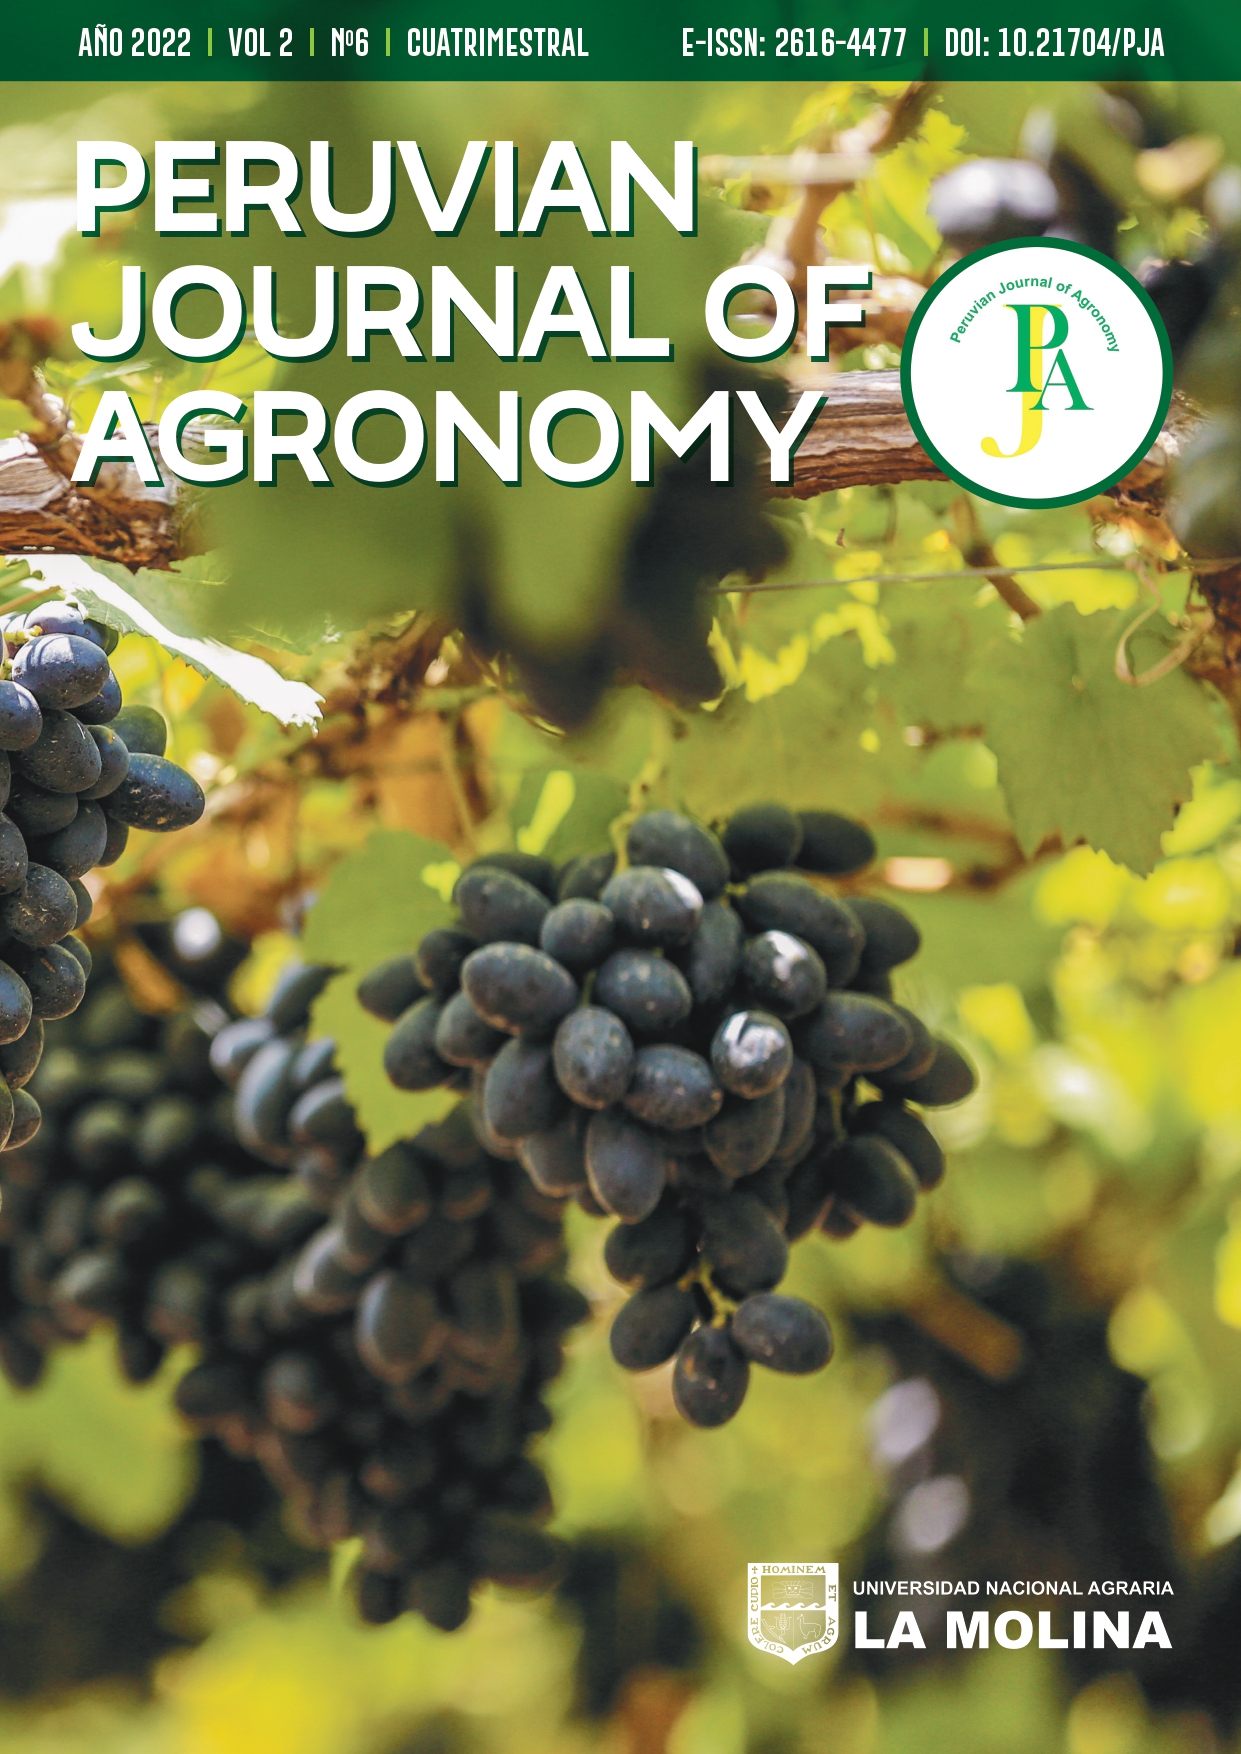 Scope The Peruvian Journal of Agronomy (e-ISSN: 2616-4477) is an international journal edited by the Universidad Nacional Agraria La Molina (UNALM). This journal publishes innovative and original research in the following areas of agricultural science: Entomology, Plant Pathology, Plant Breeding, Horticulture, and Soil science. This journal publishes in American English for university audience as well as the general scientific community. The objective of the journal is to disseminate the results of research conducted by Peruvian and foreign investigators, through scientific articles, which represent a contribution to the development of science and technology in our area. 